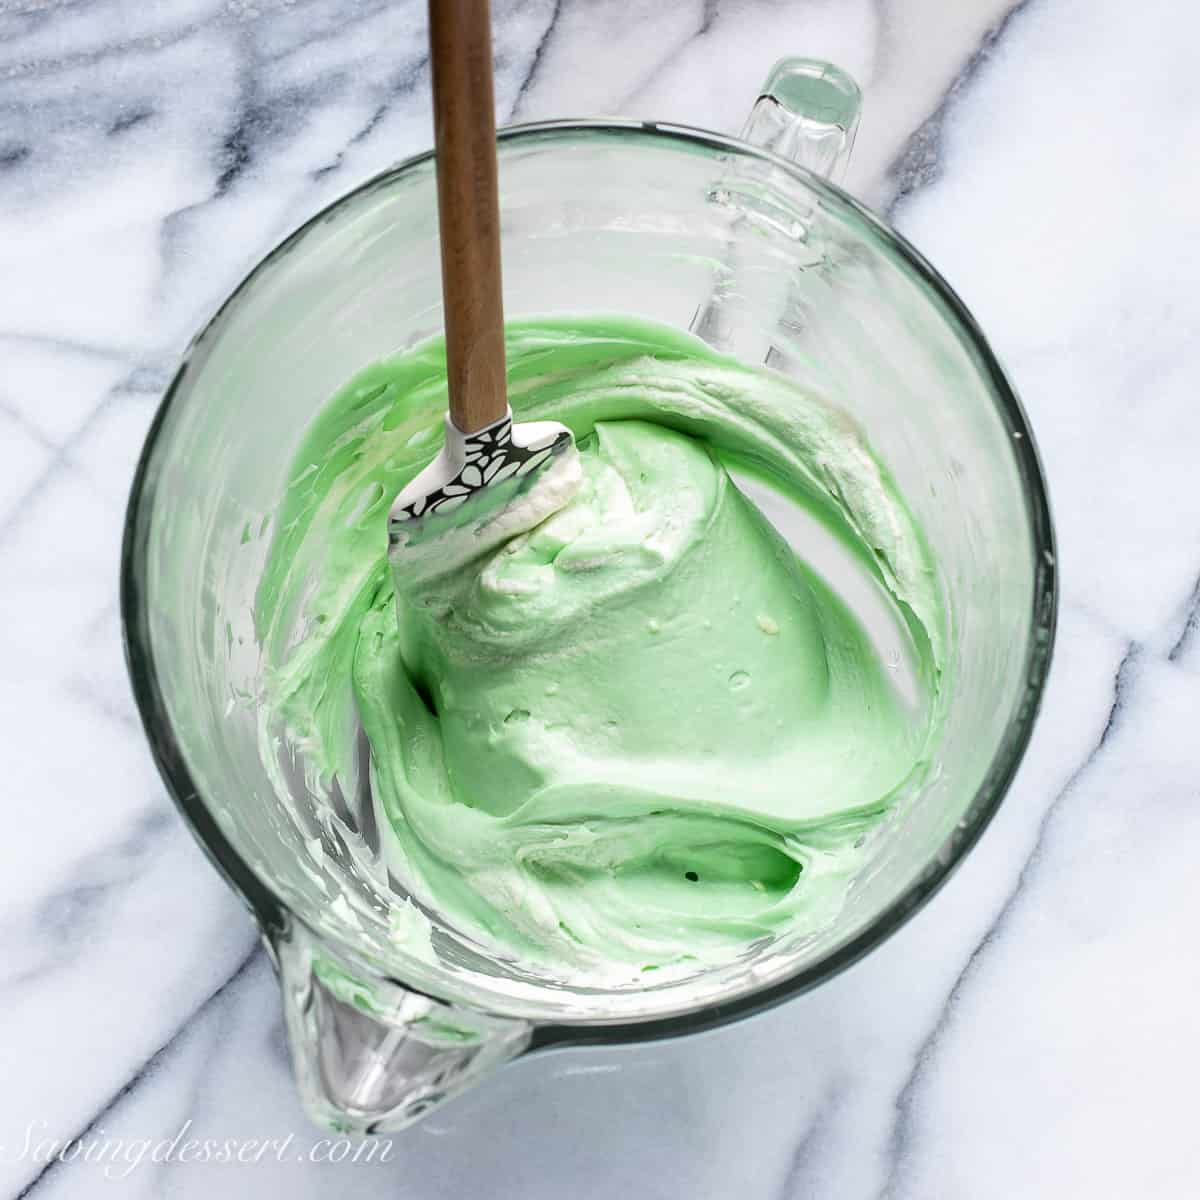 A bowl with minty green pie filling